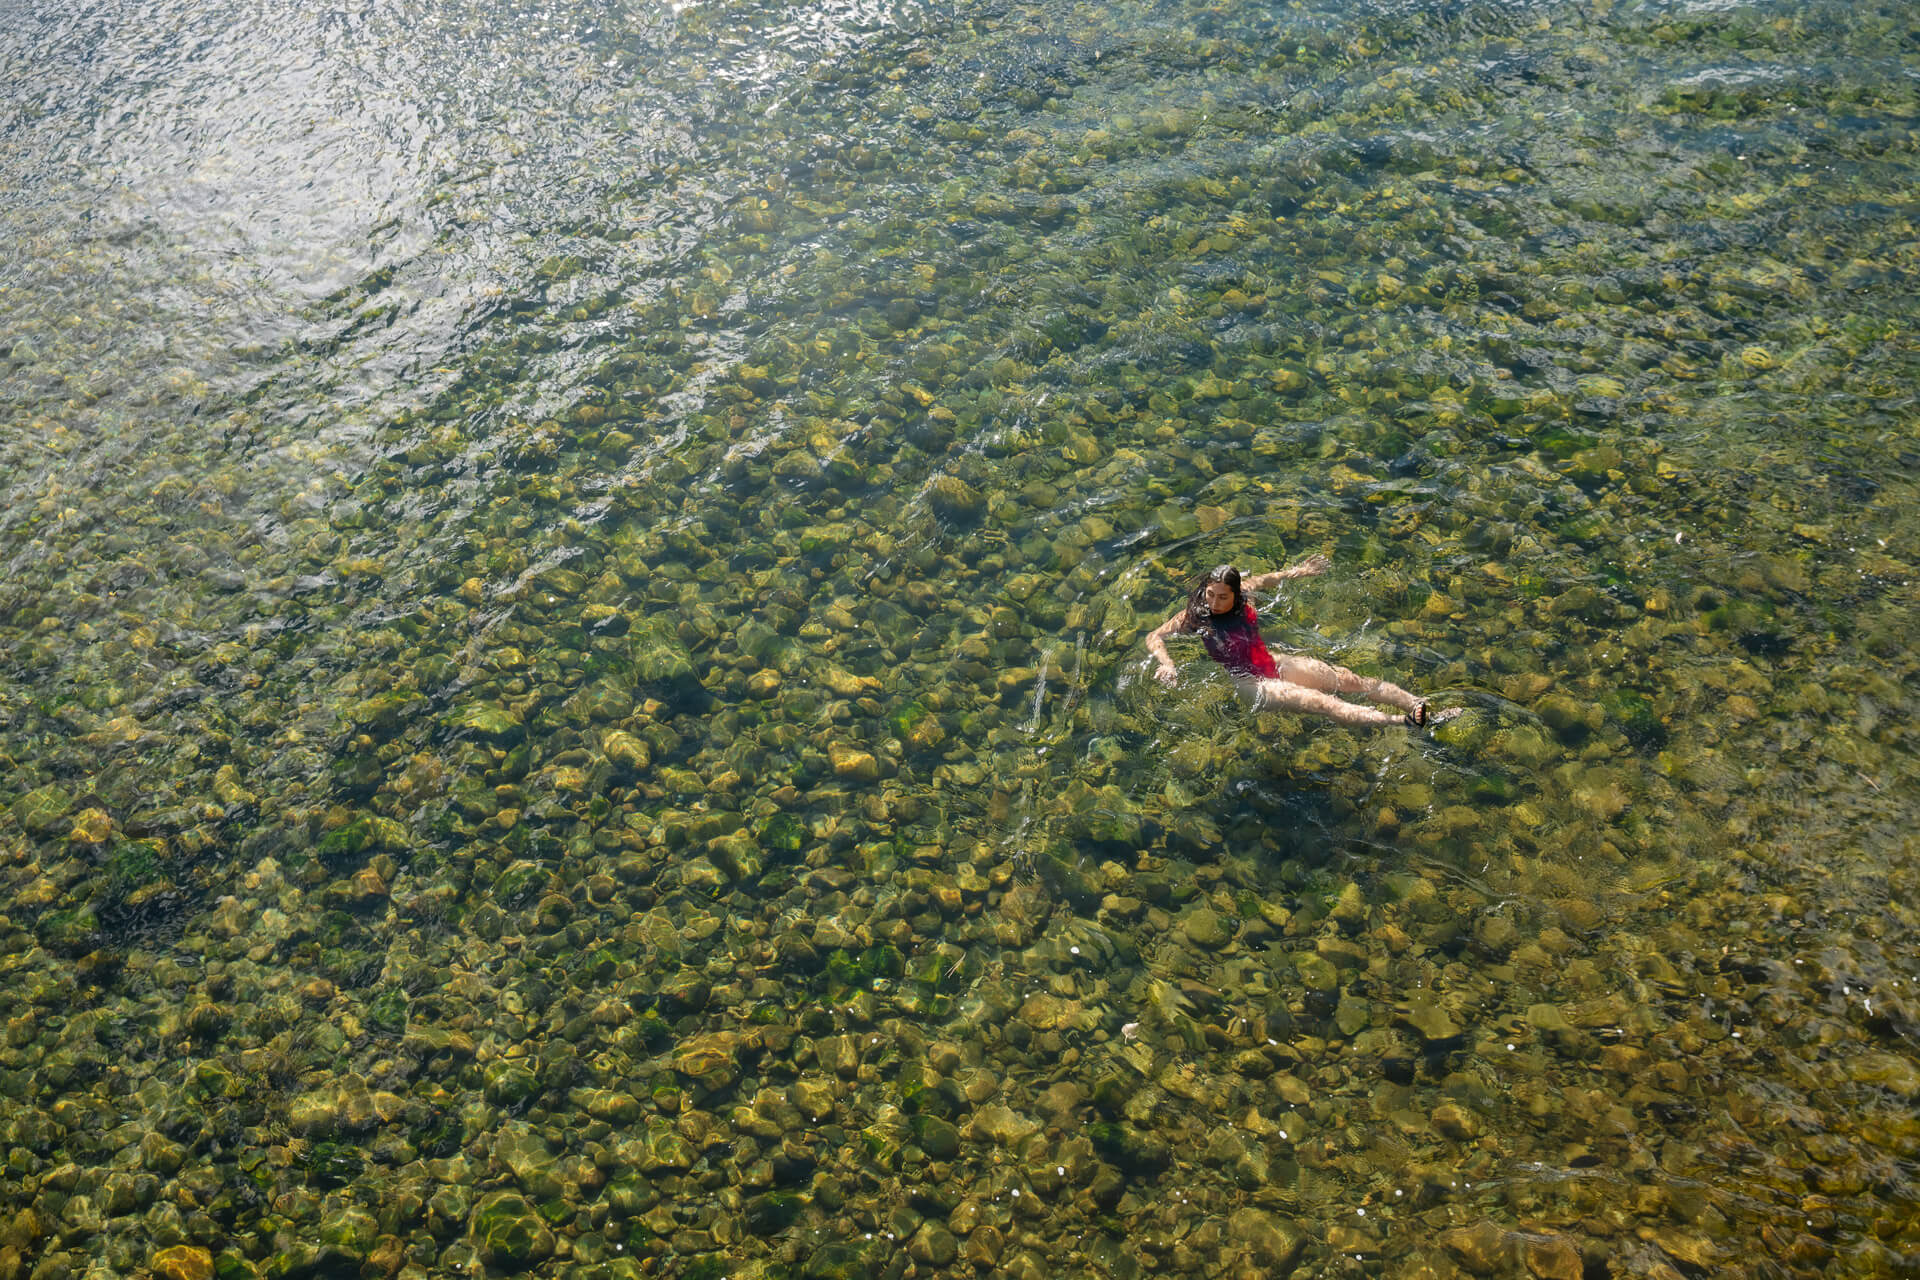 A woman enjoys swimming in the Methow River in Washington.